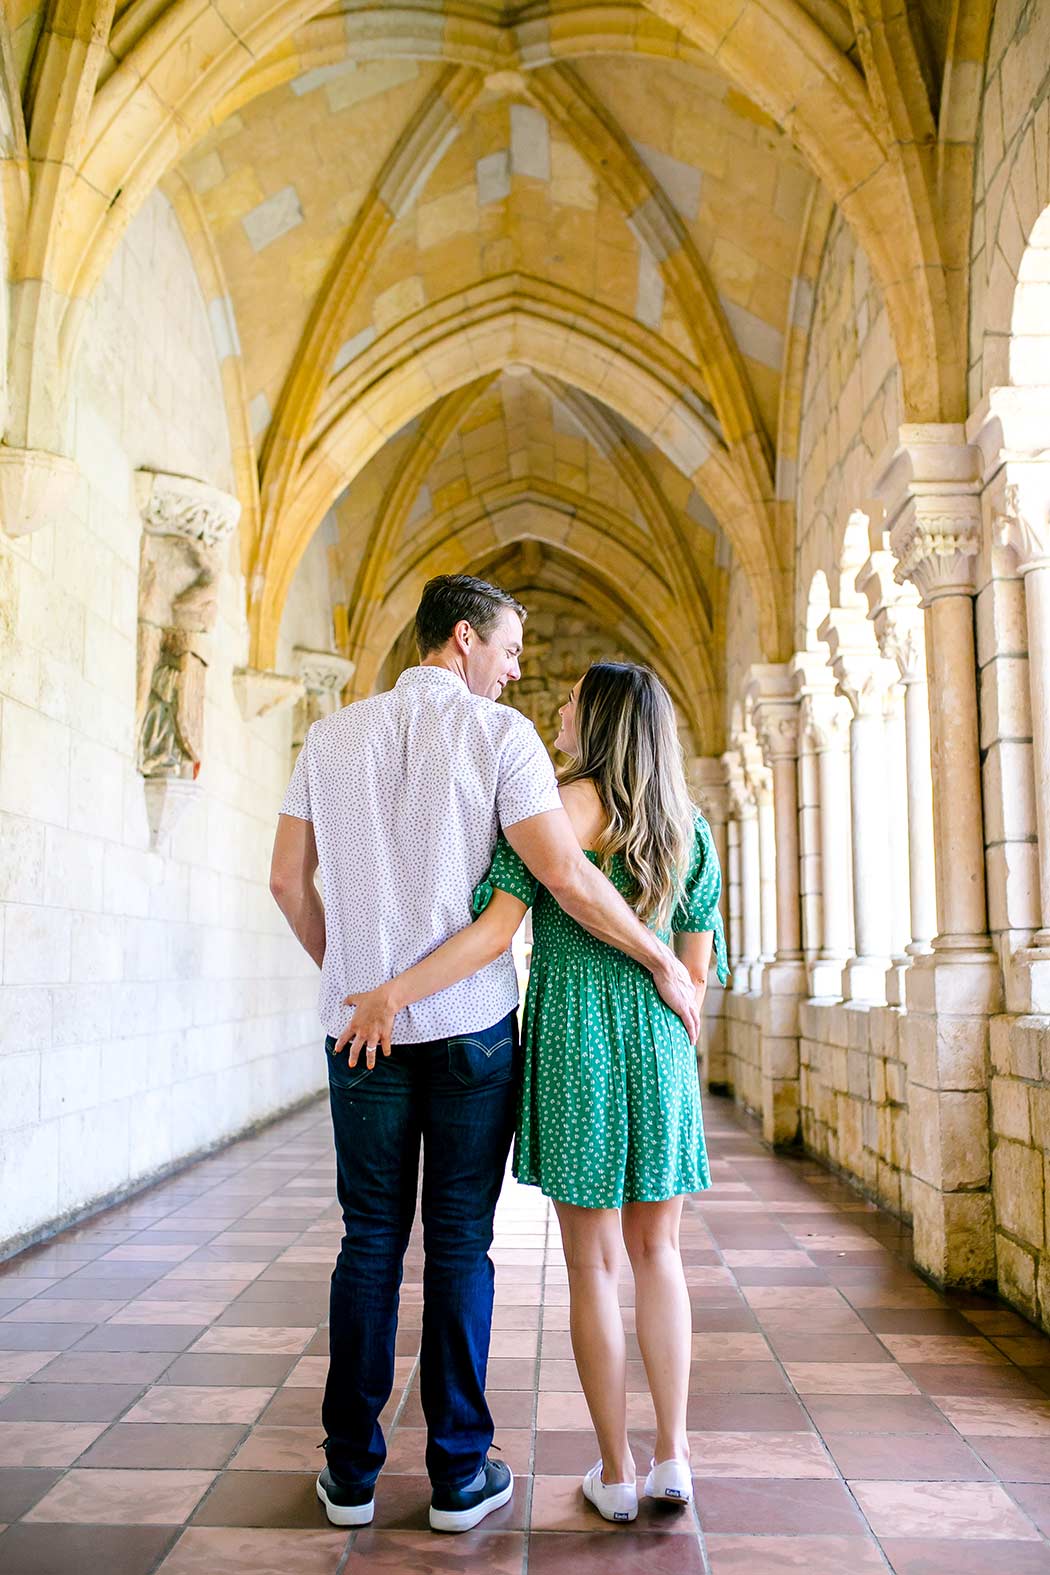 unique pose for engagement photography | engagement photography pose | surprise marriage proposal photography